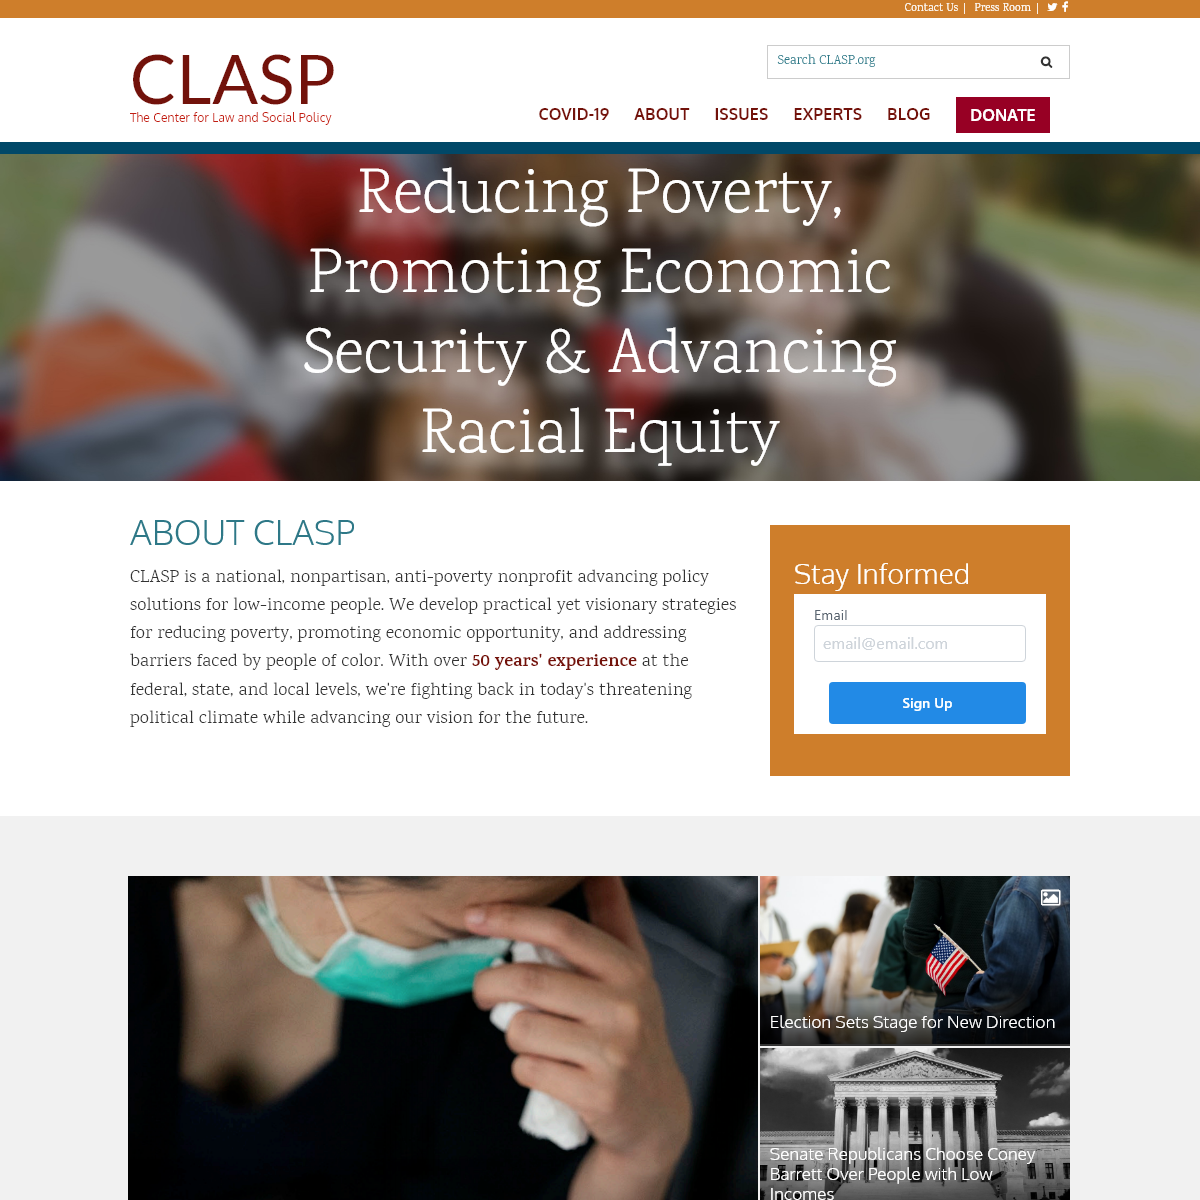 A complete backup of clasp.org